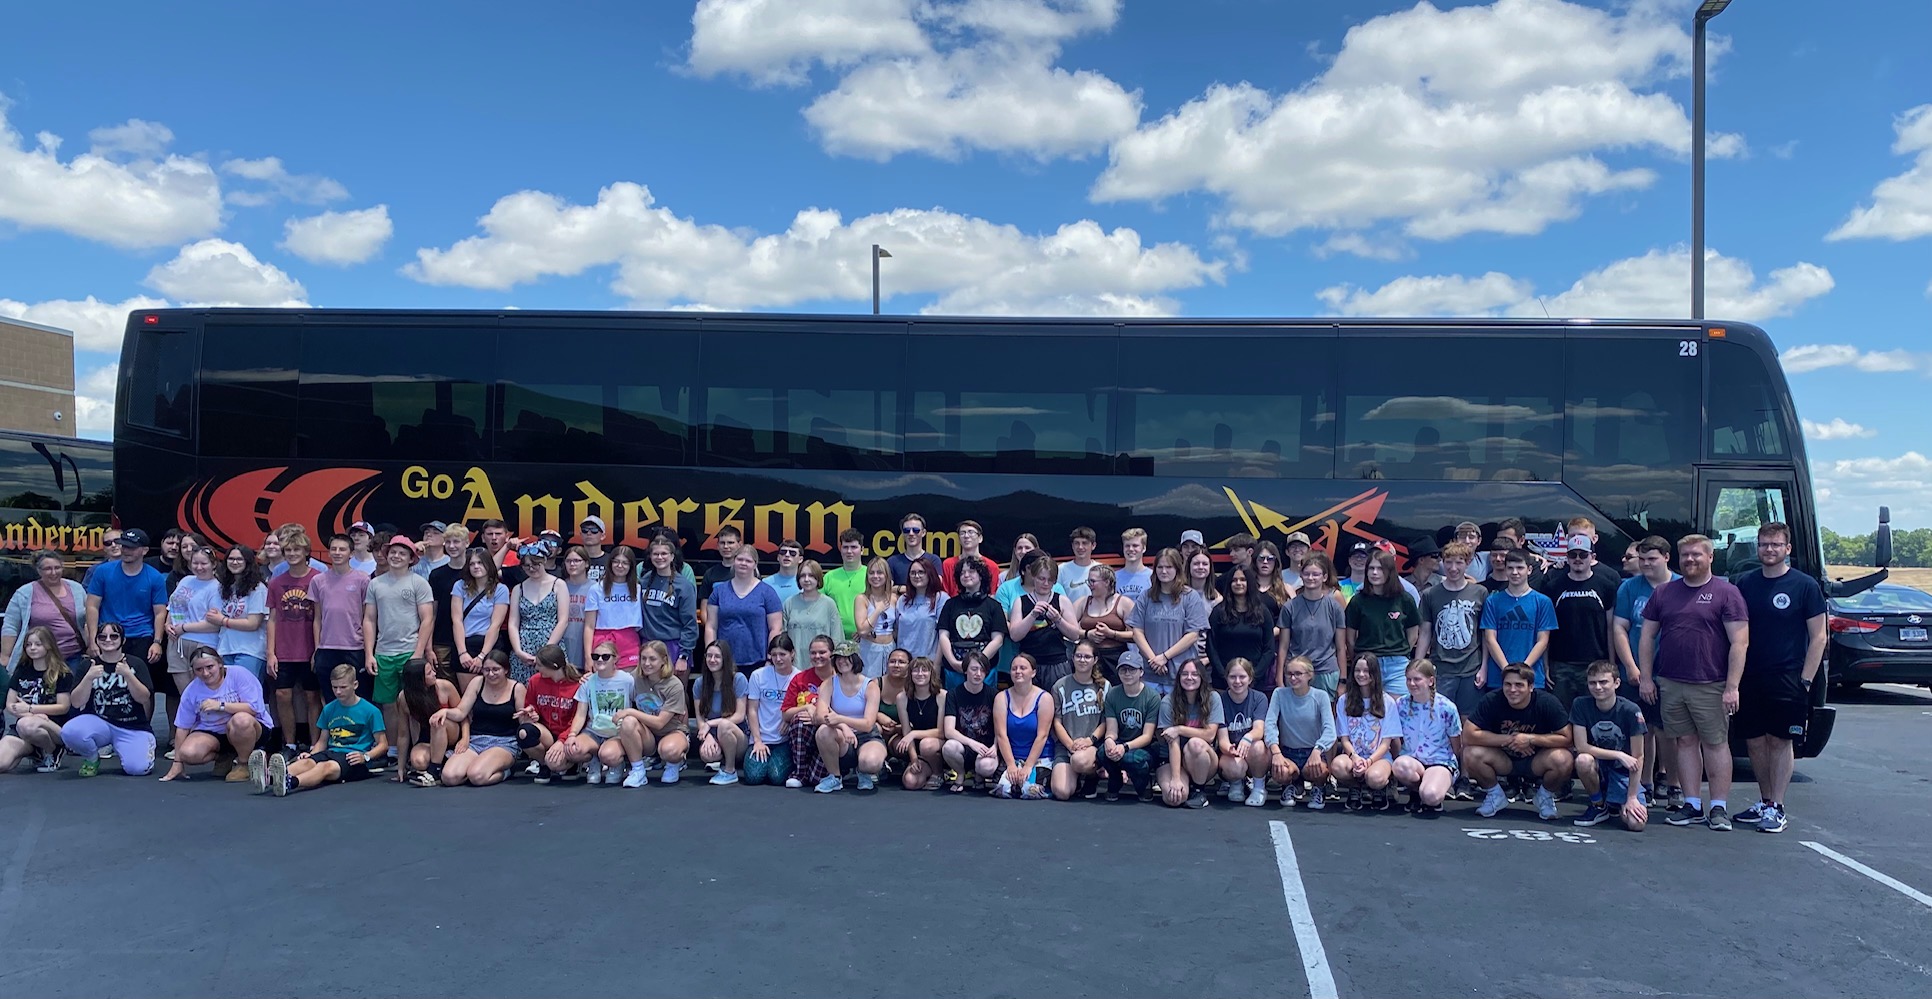 Members of the band and choir groups pictured in front of their tour bus headed to Disney.